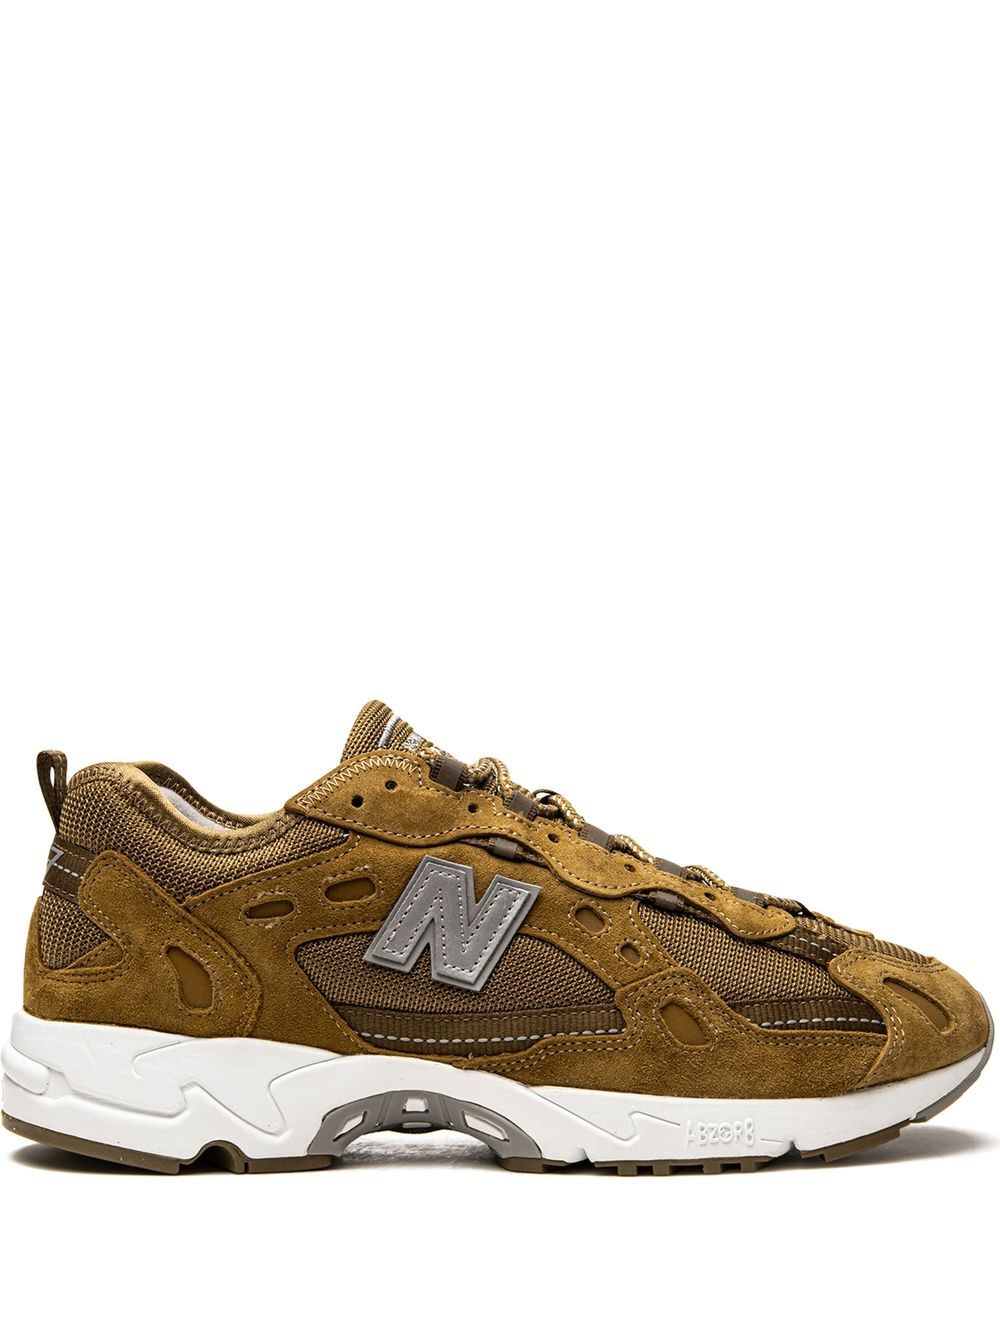 New Balance 827 "Thisisneverthat" sneakers - Brown von New Balance